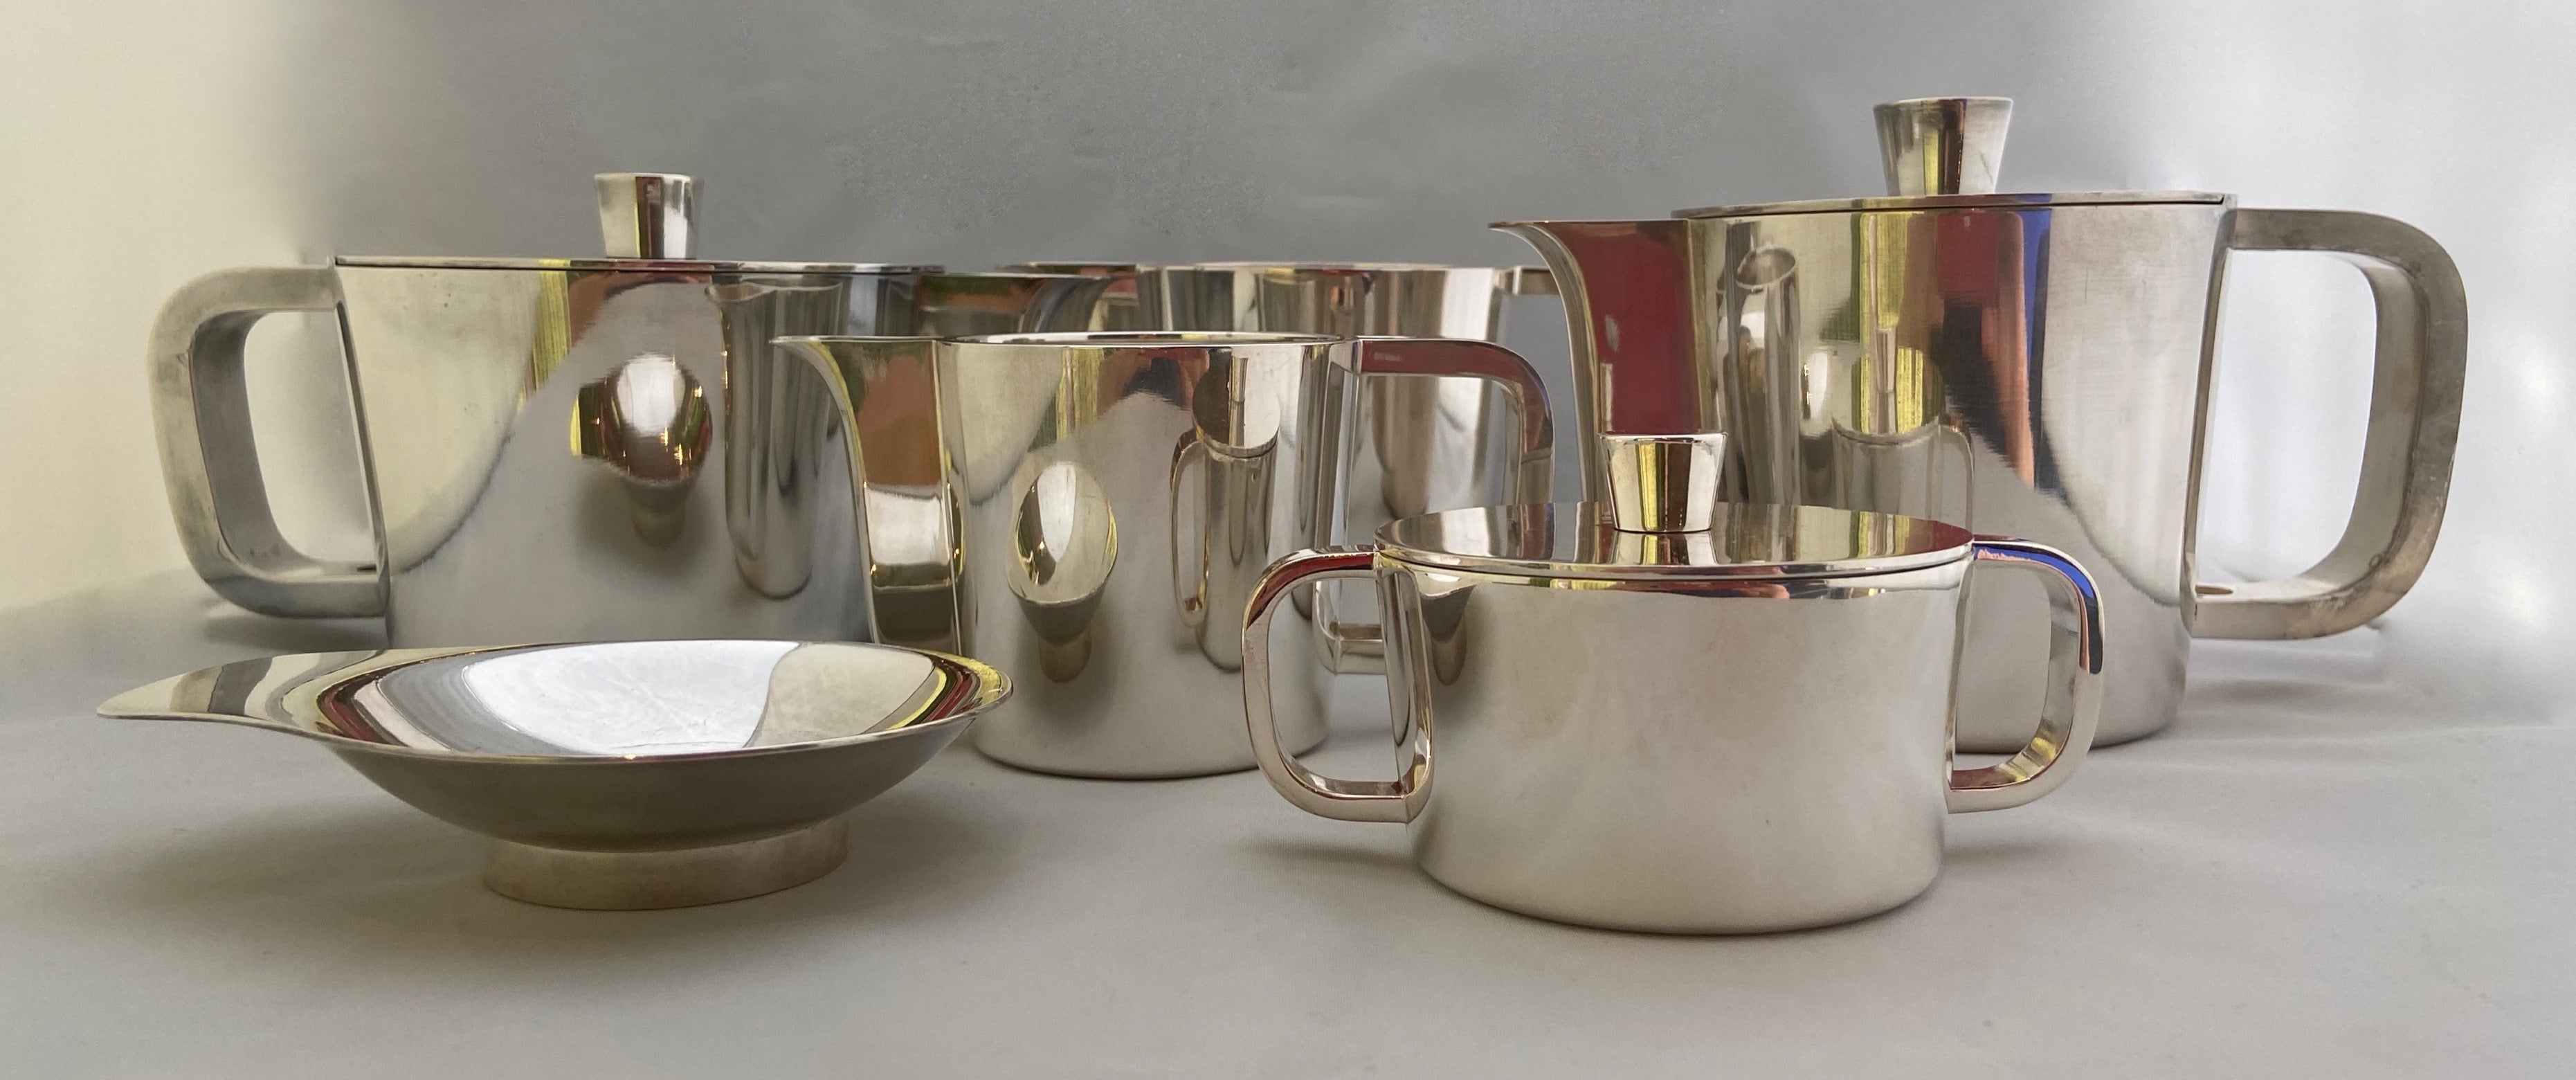 Extensive Silver Plated Gio Ponti Coffee and Tea Set on a Tray, Arthur Krupp 1